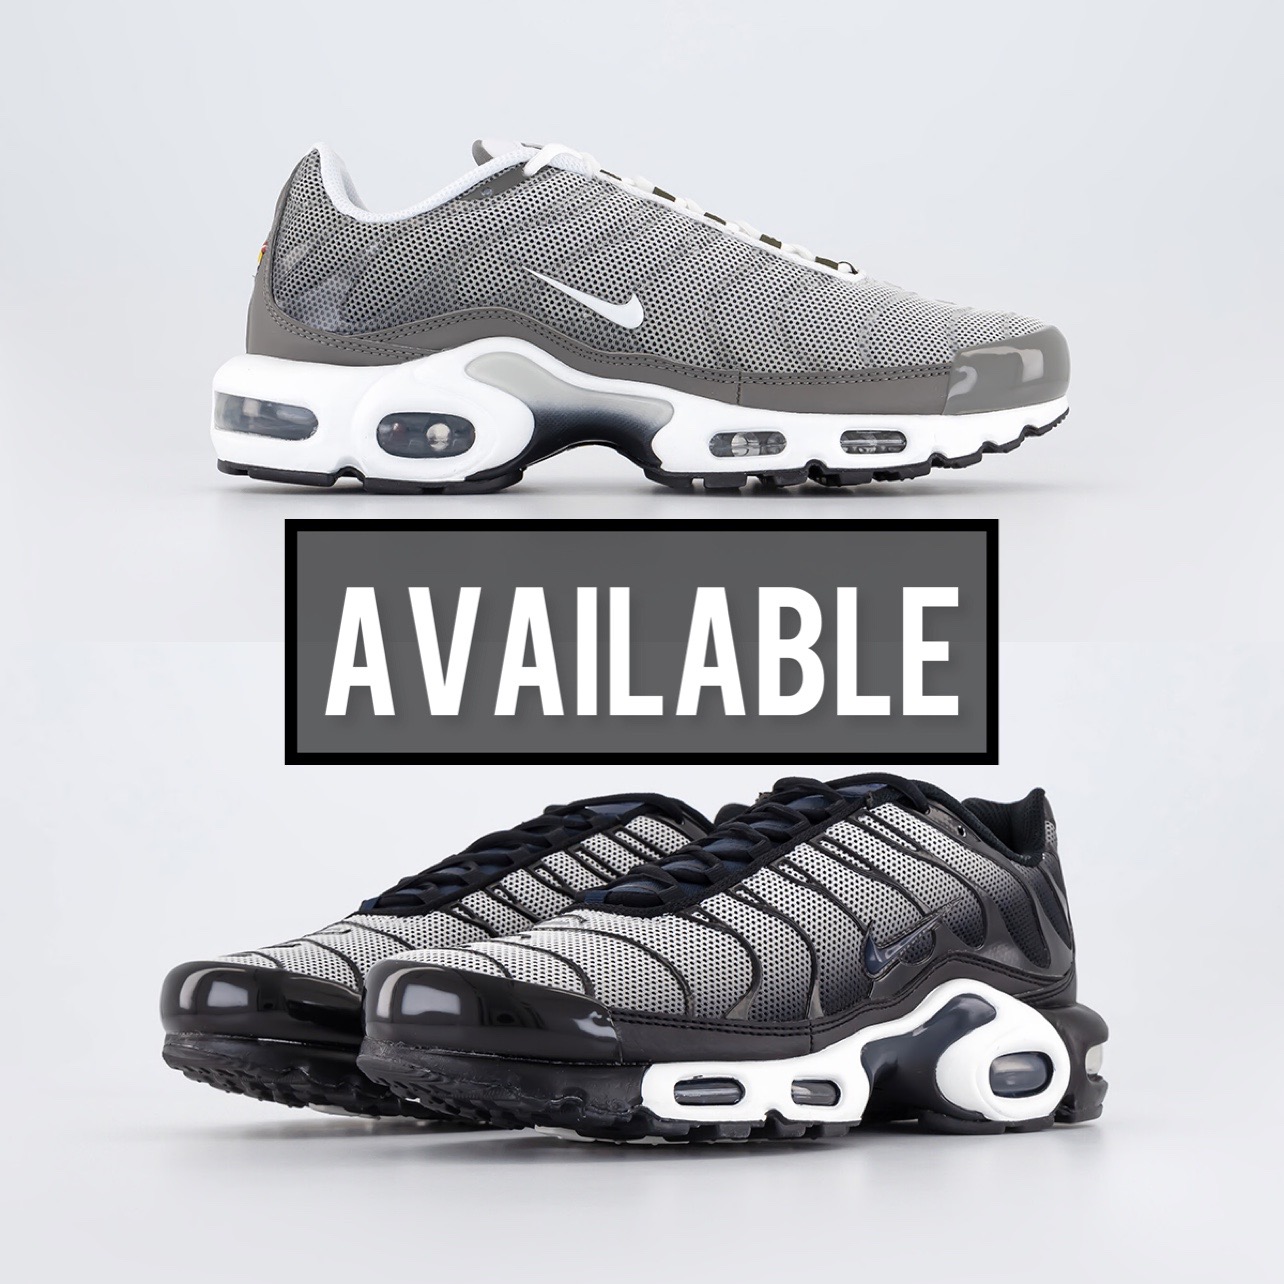 Both Nike TN Air Max Plus Flat Pewter And Nike TN Air Max Plus Black Midnight Navy Available